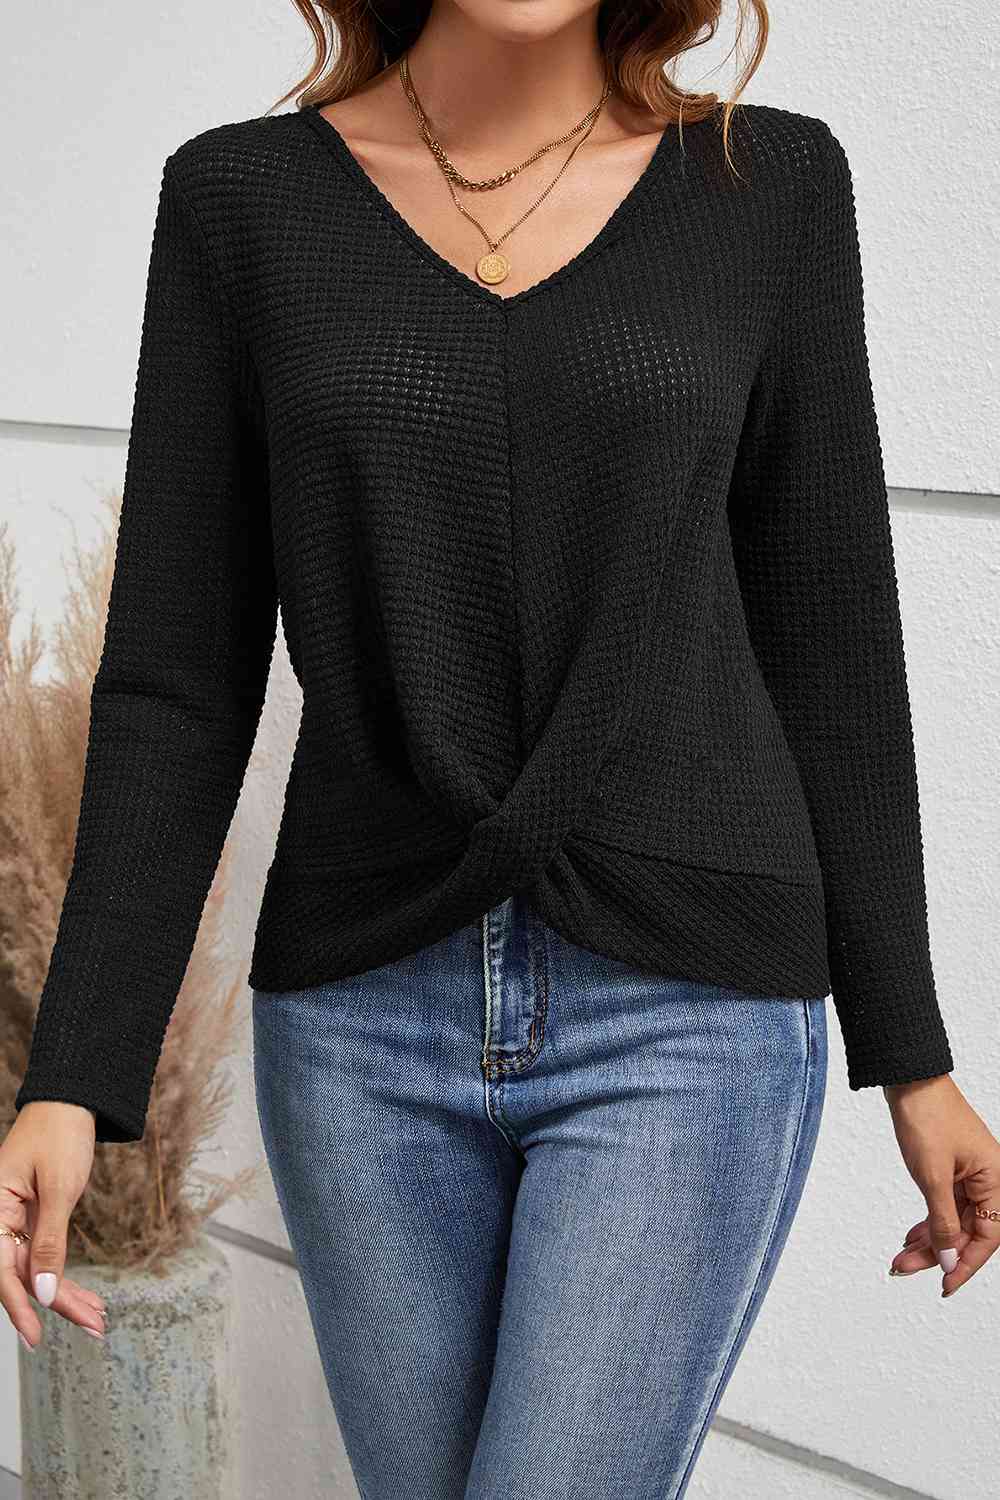 Lace Detail V-Neck Twisted Blouse - Black / S - Women’s Clothing & Accessories - Shirts & Tops - 1 - 2024